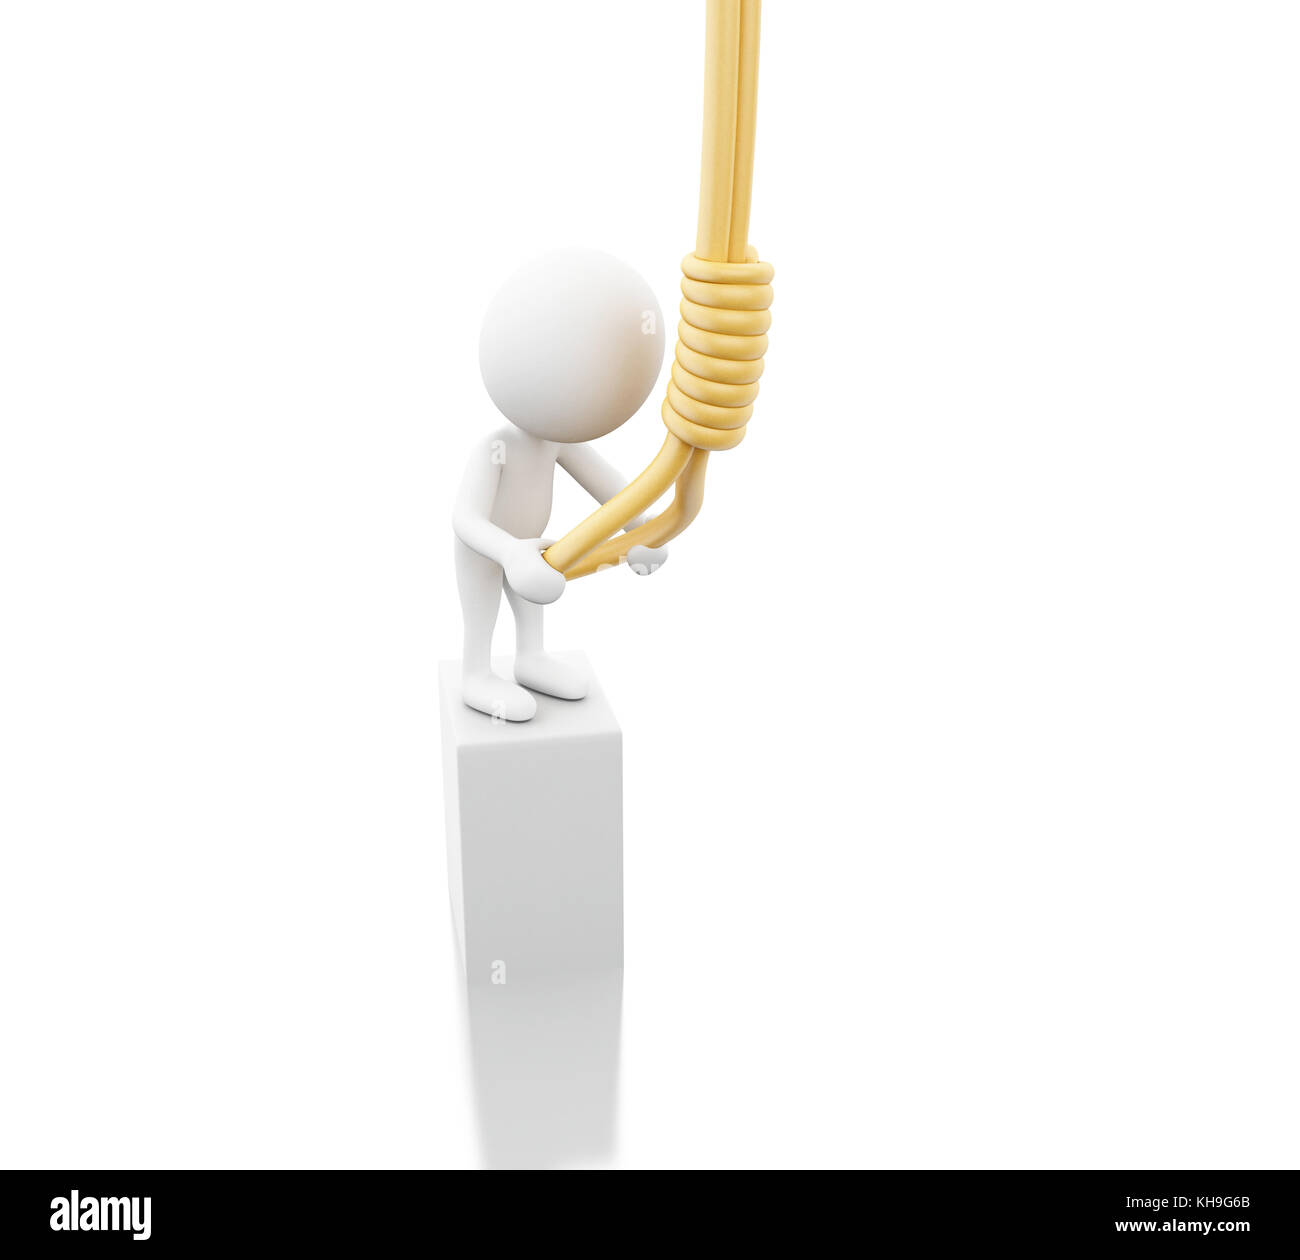 3d illustration. White people trying to hang himself. Suicide concept. Isolated white background Stock Photo